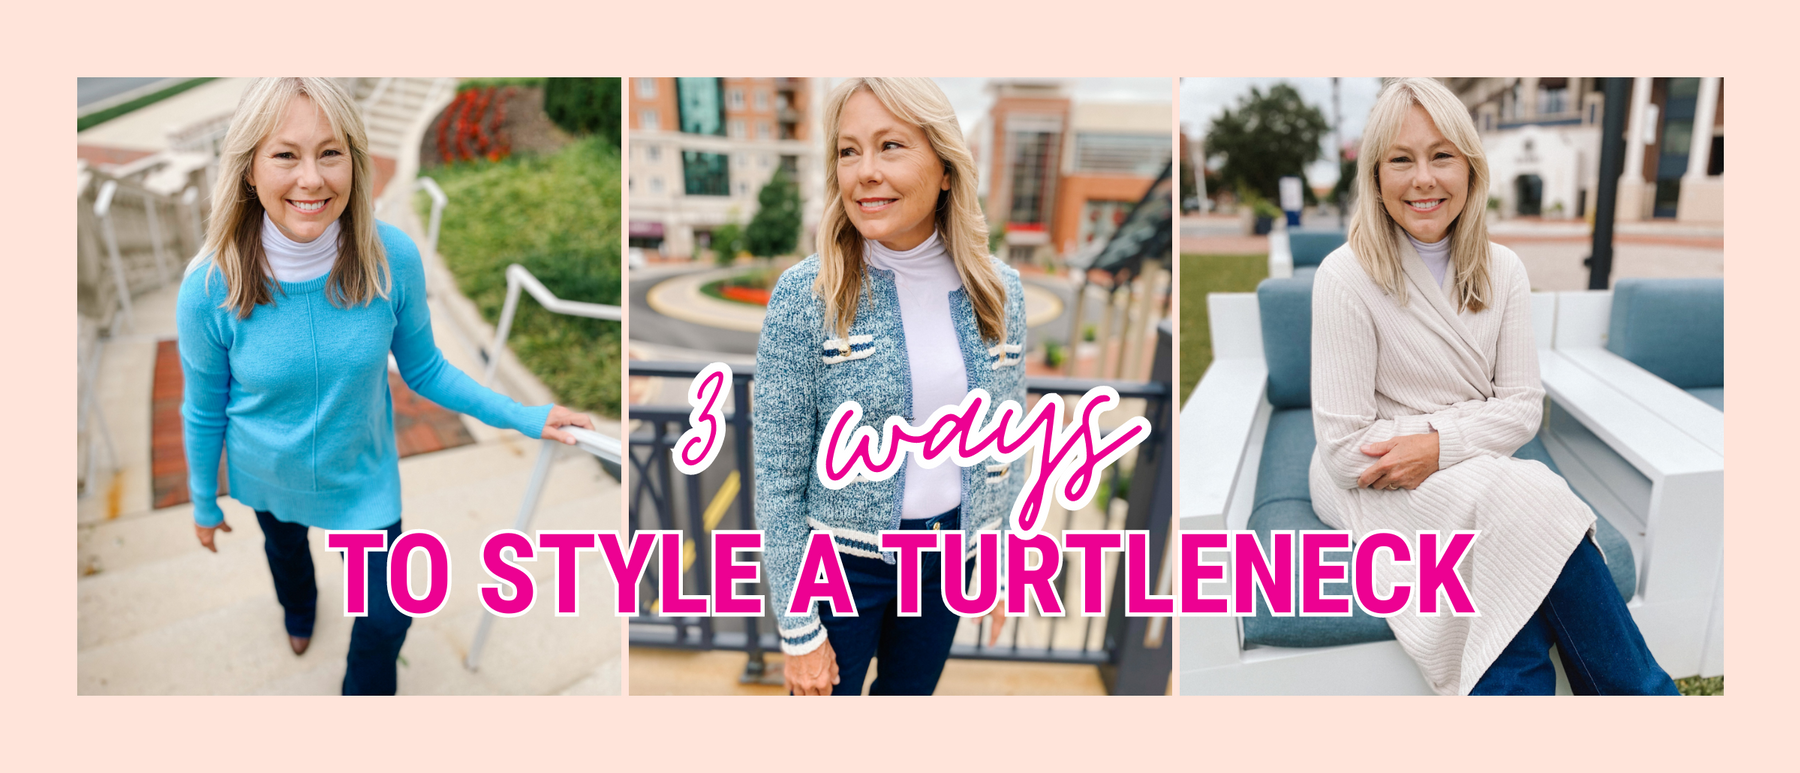 Effortlessly Chic: 3 Ways to Style a Turtleneck Top